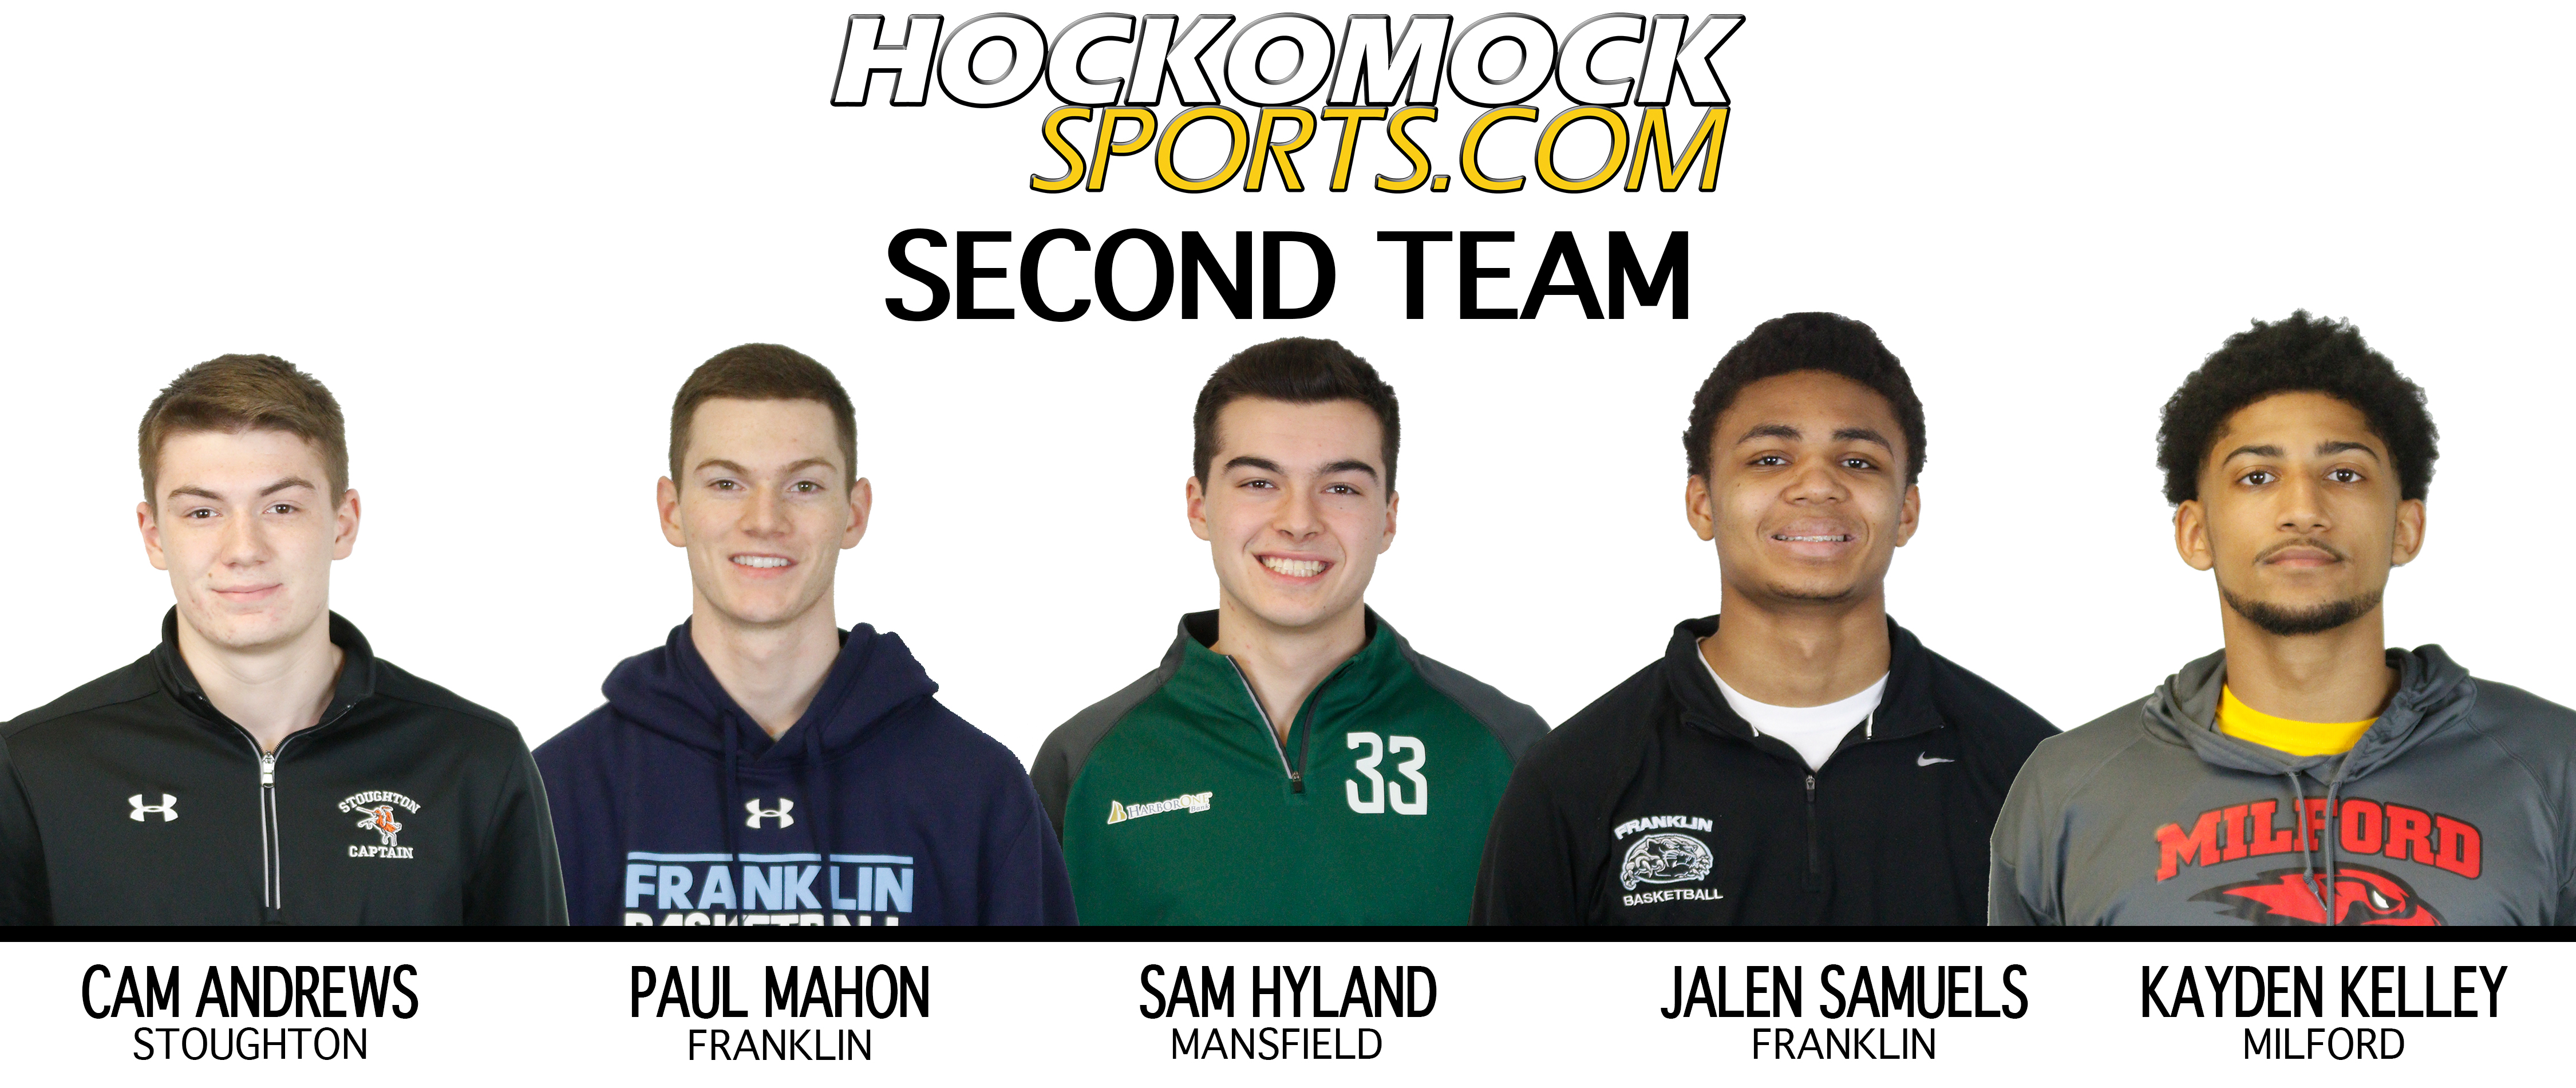 HockomockSports.com Second Team features Paul Mahon and Jalen Samuels from FHS